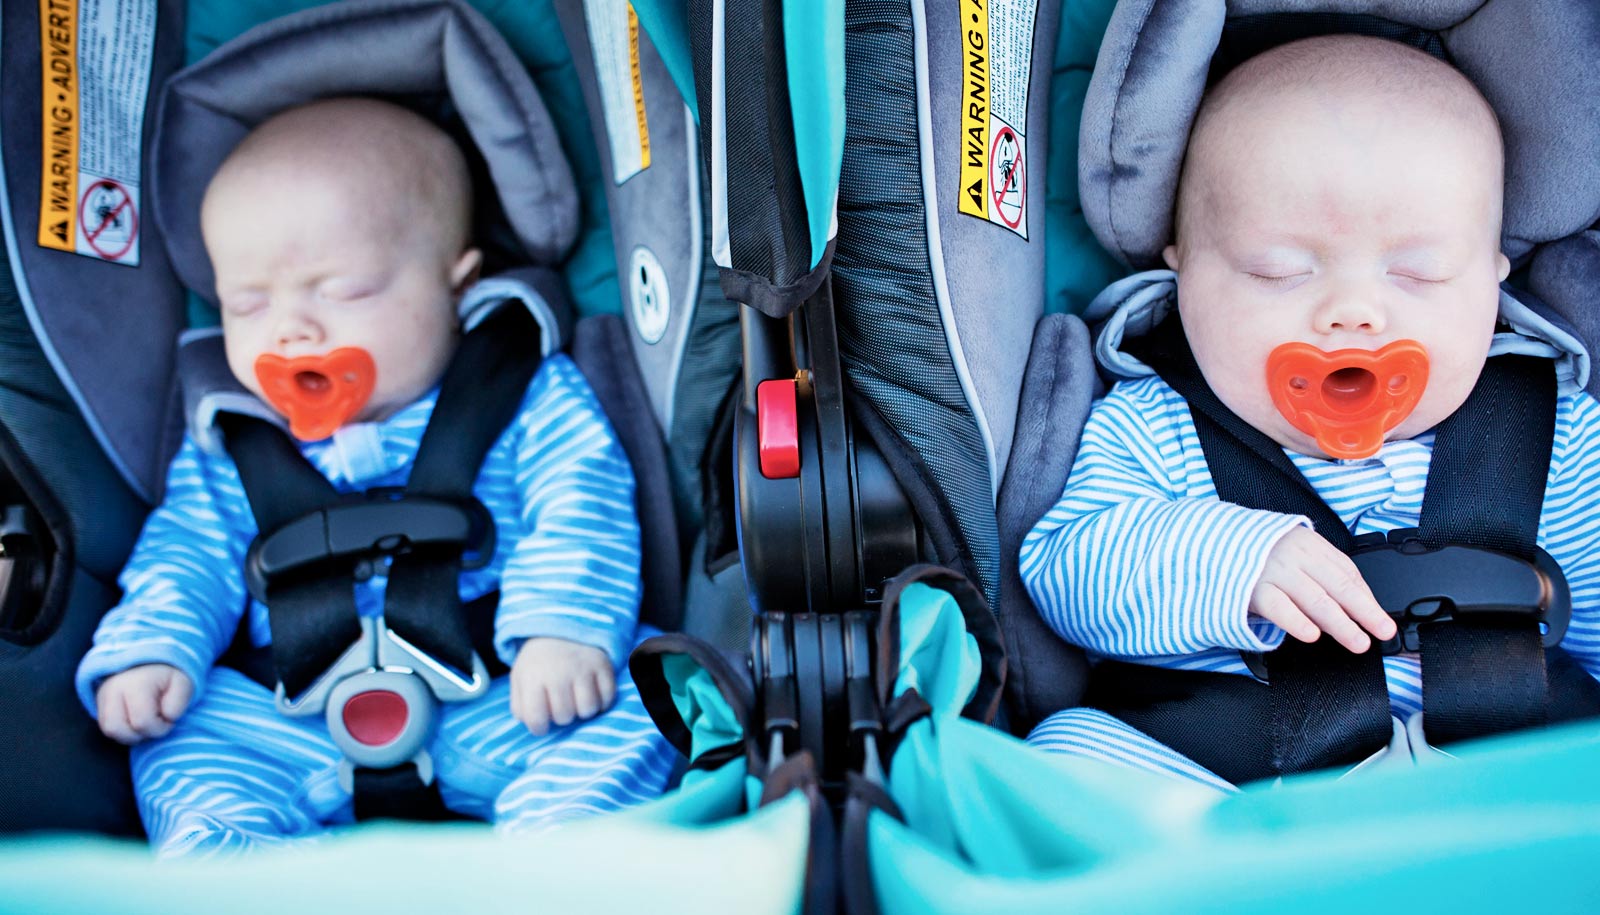 Multiple births are more common but face disadvantages ...